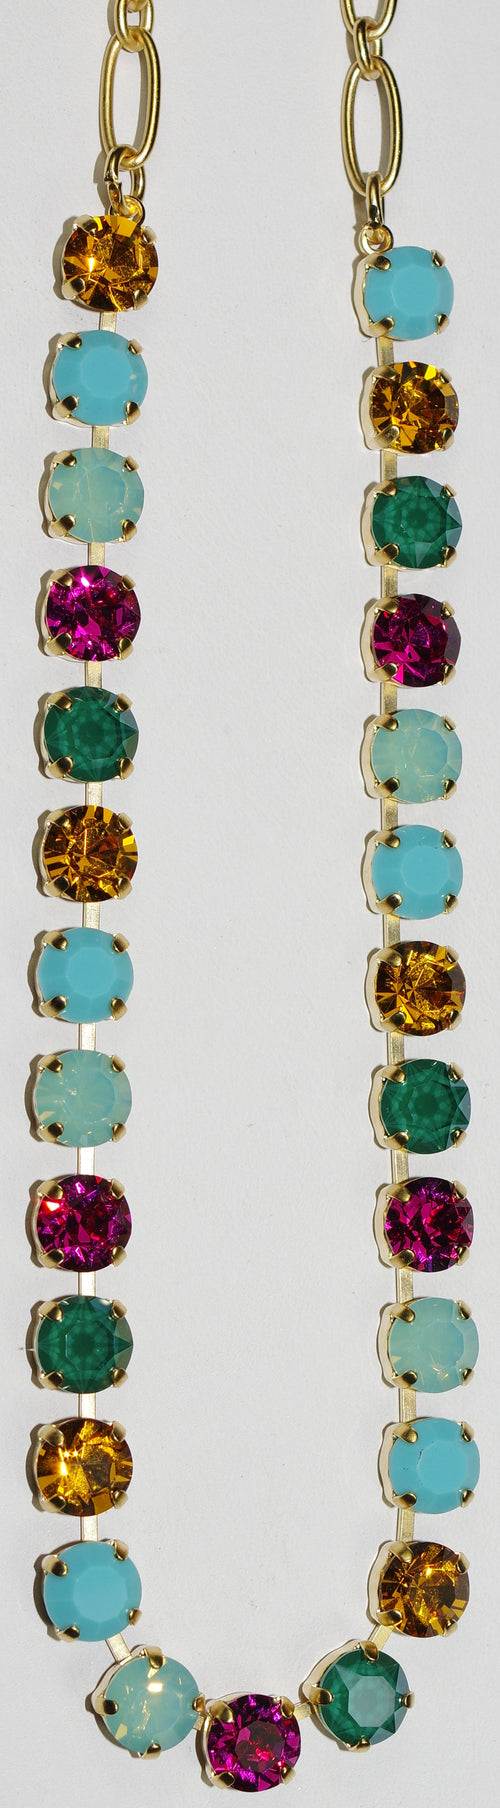 MARIANA NECKLACE BETTE HAPPY DAYS: blue, pink, amber, pacific opal 1/4" stones in a yellow gold setting, 17" adjustable chain